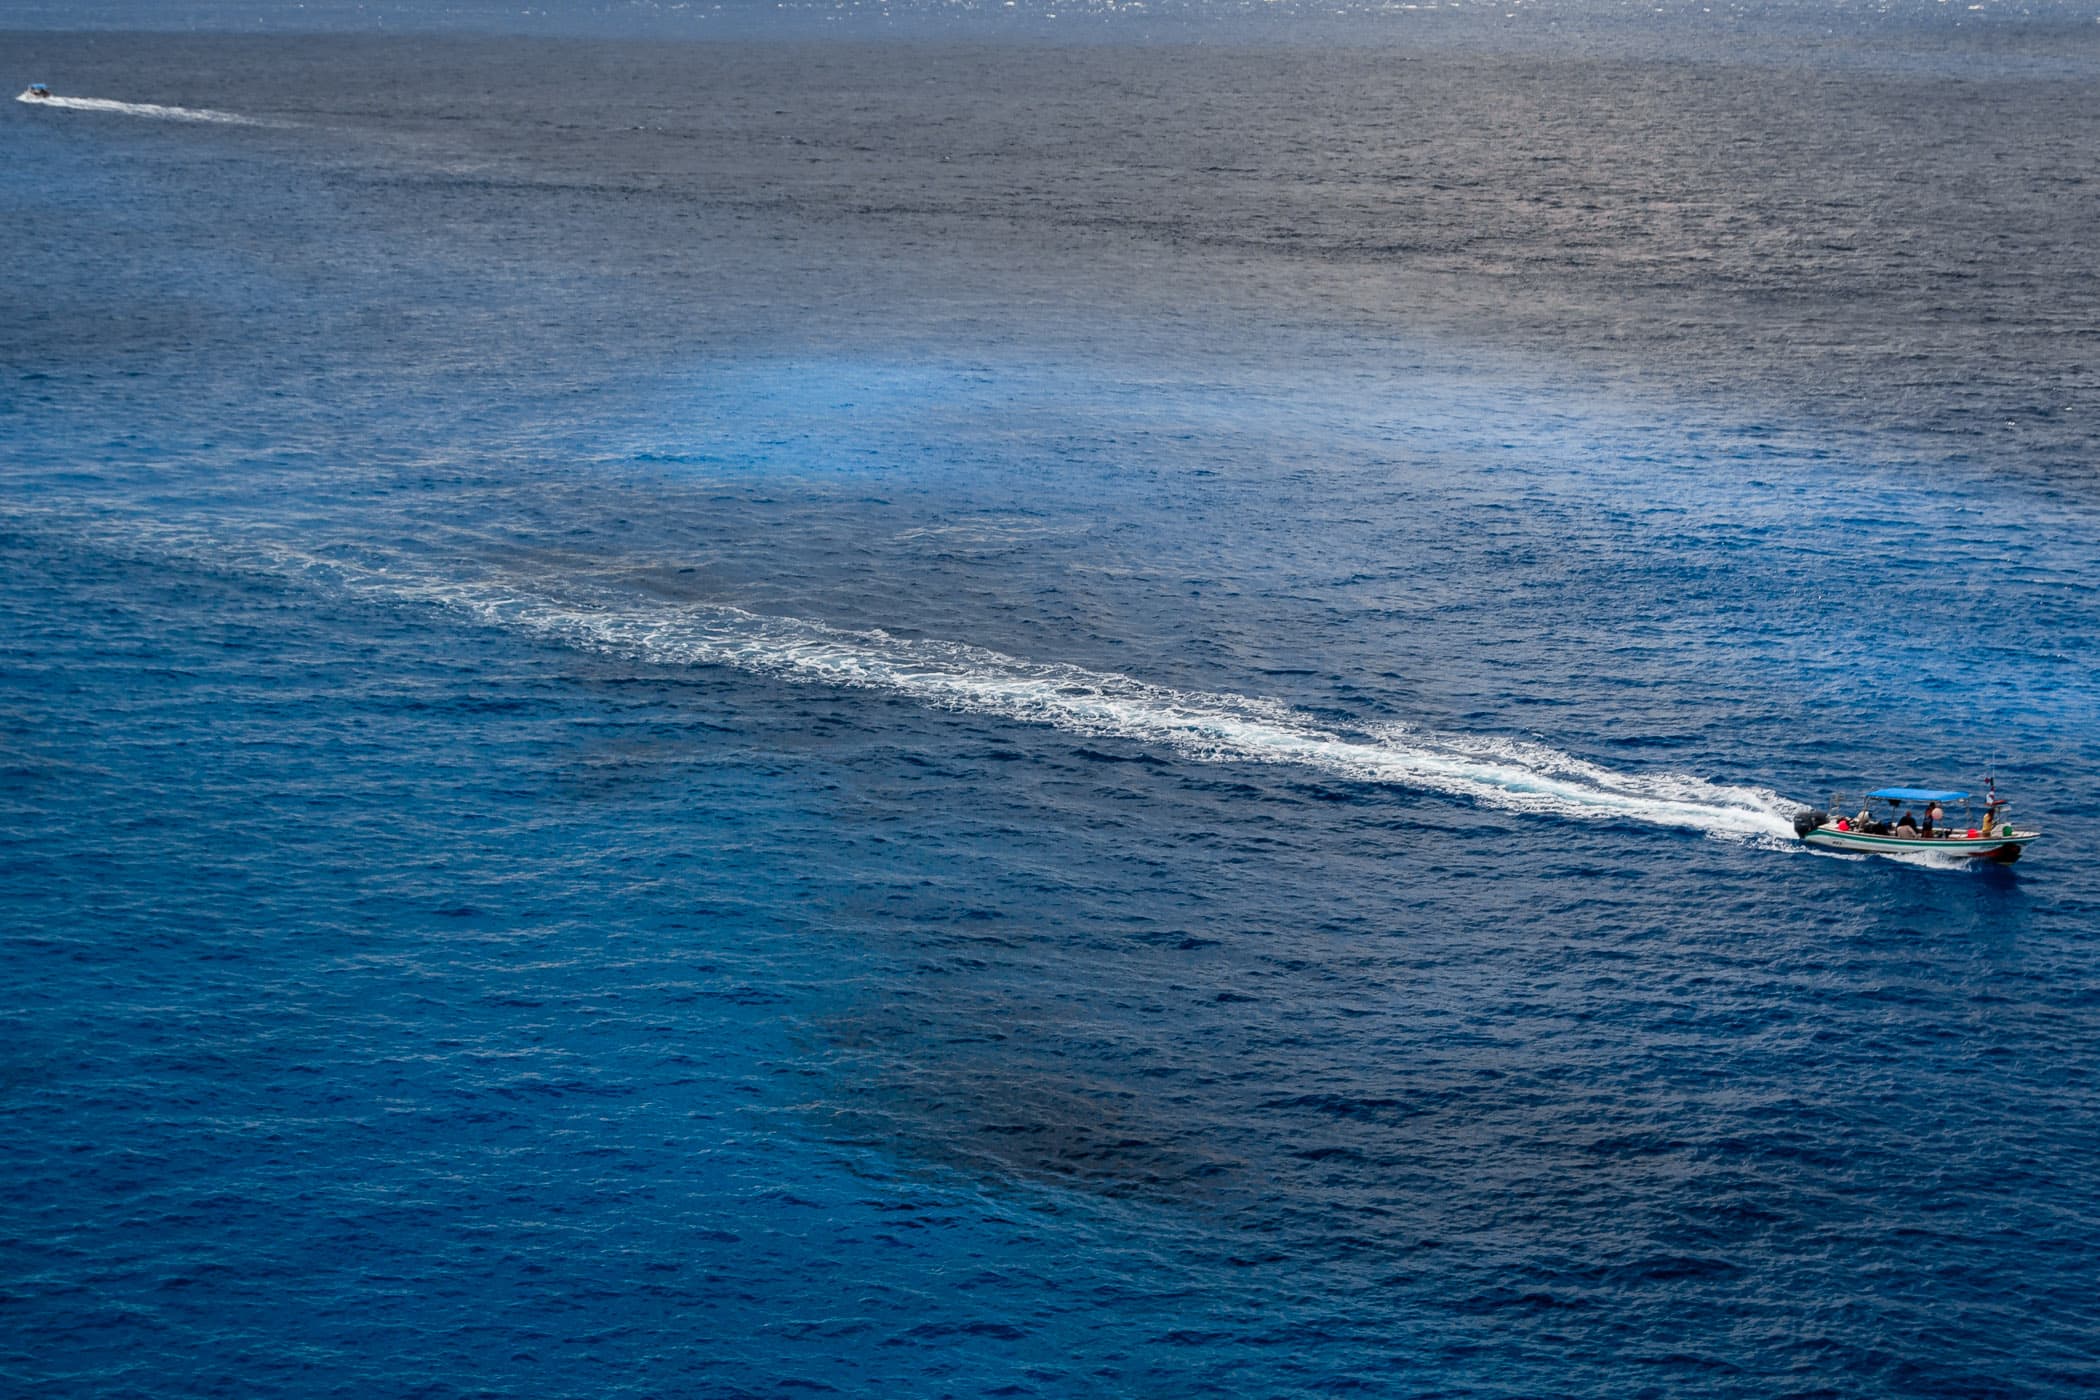 A boat cuts through blue waters just off the coast of Cozumel, Mexico.